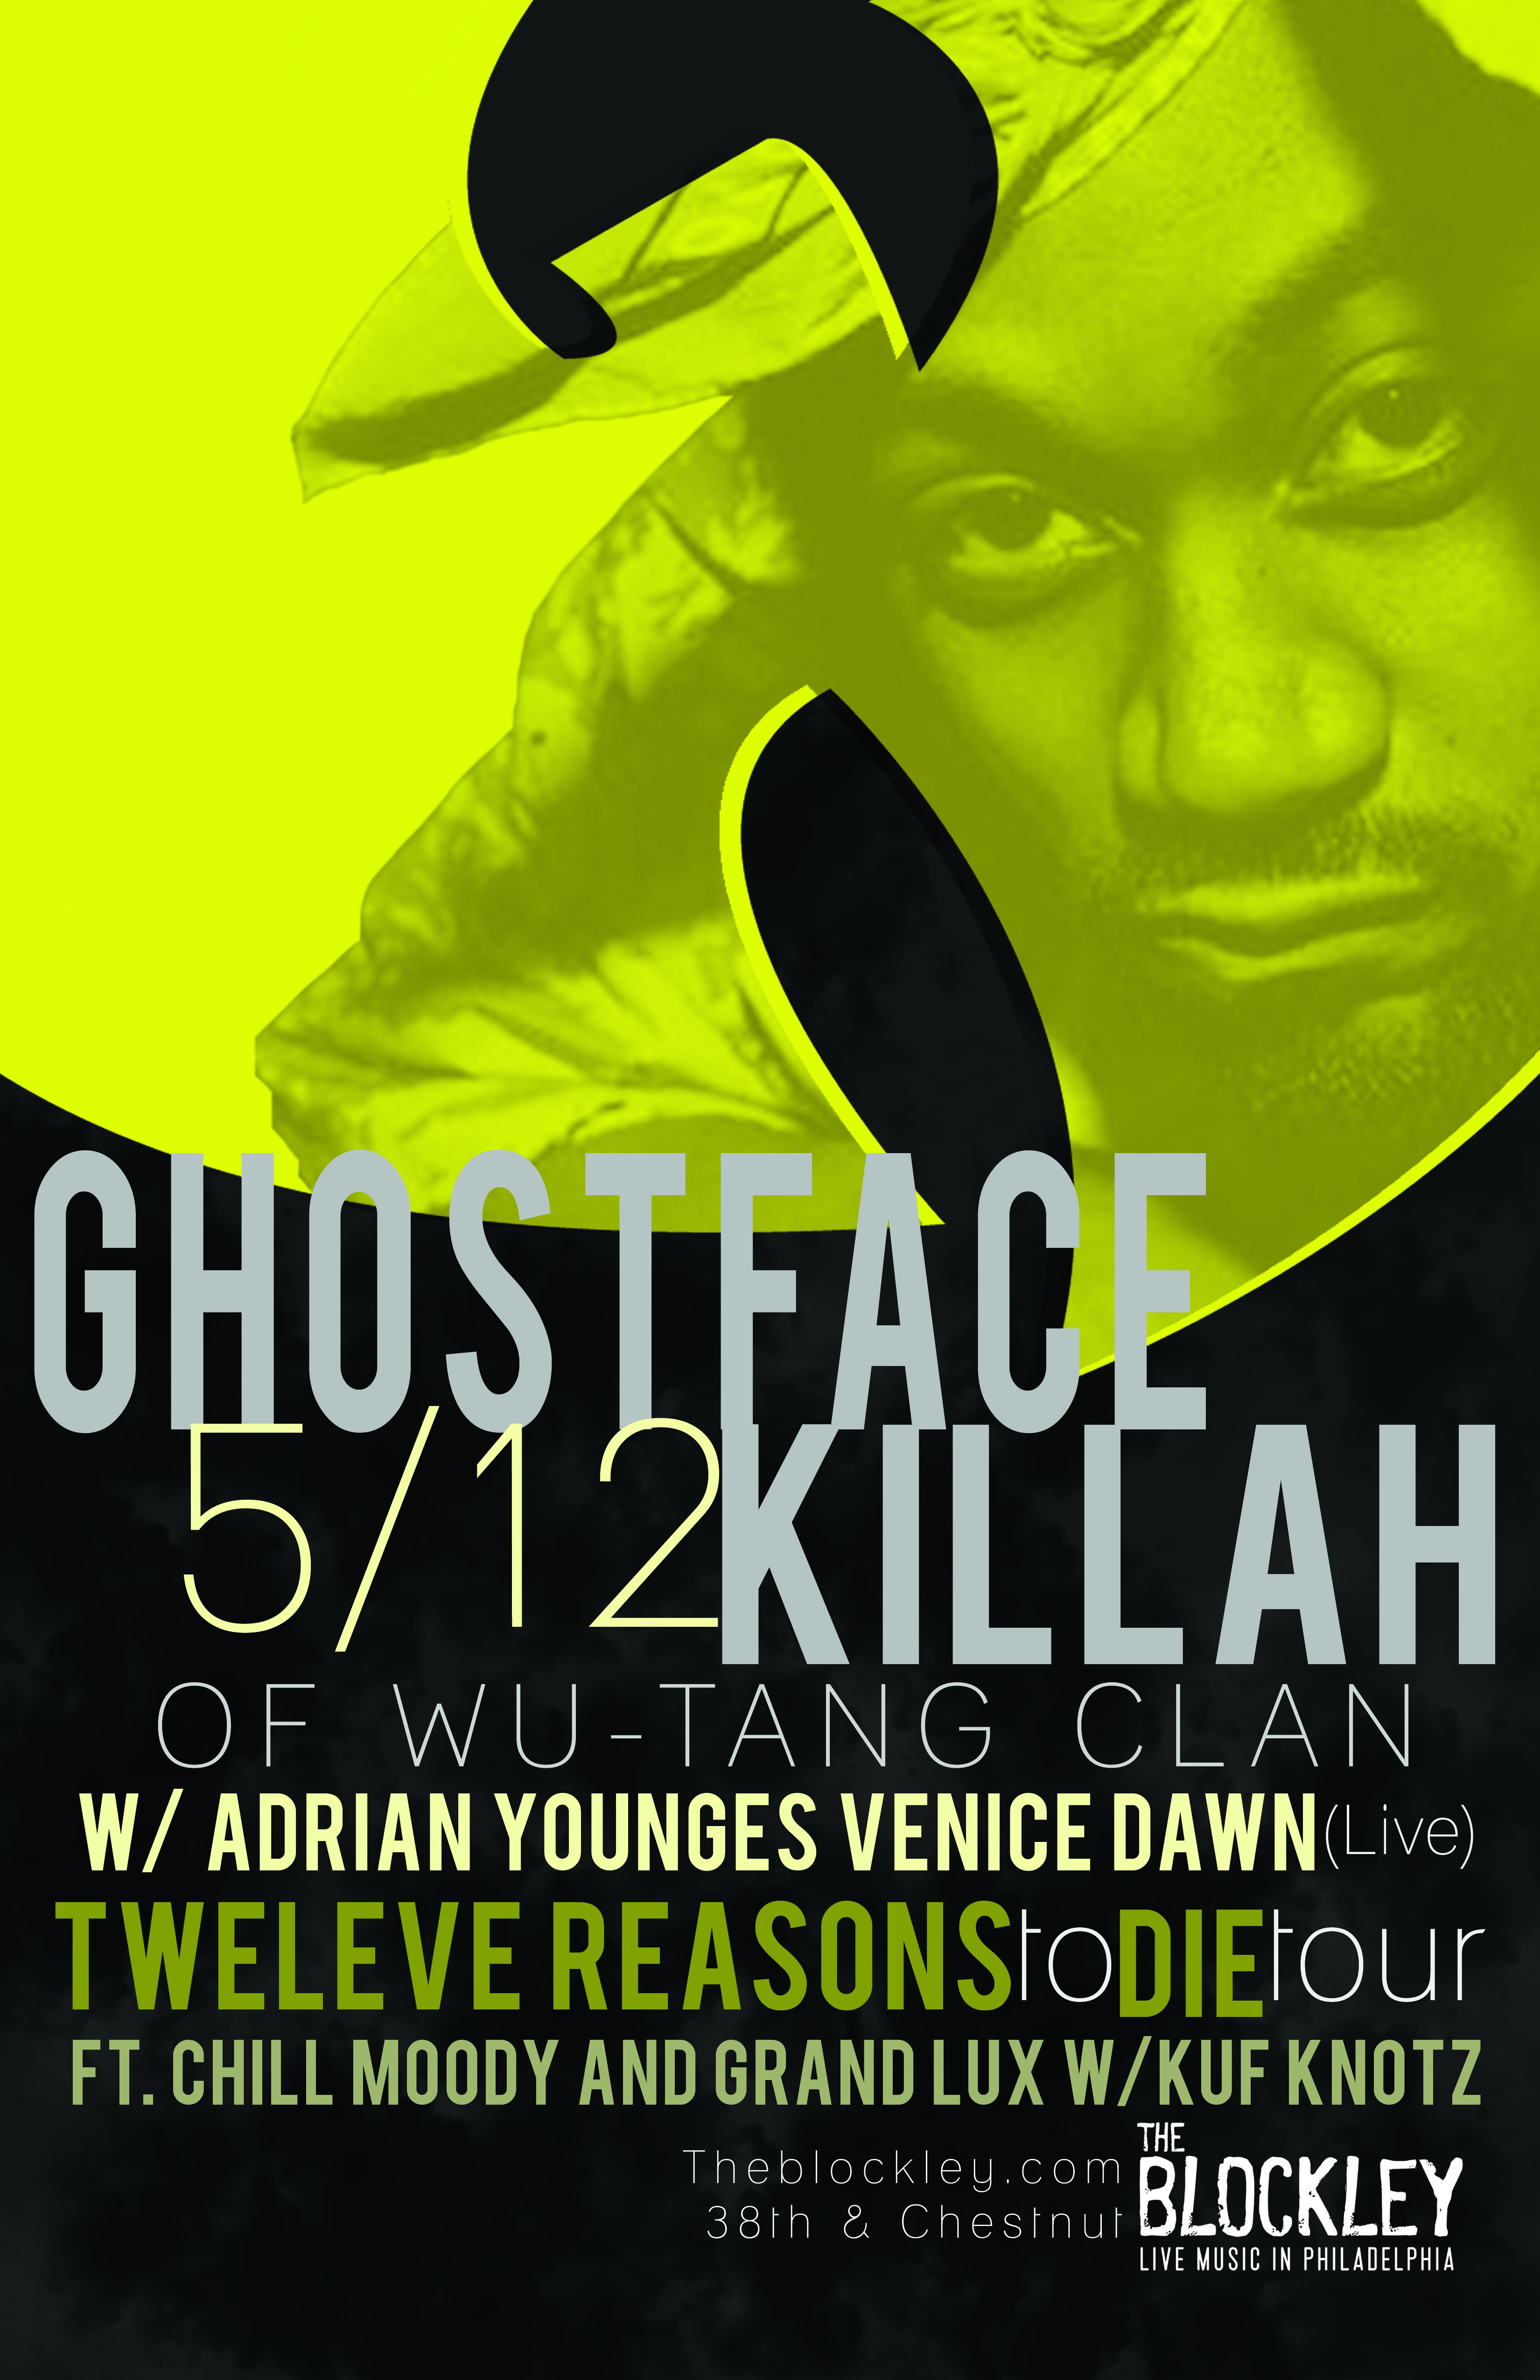 win-tickets-ghostface-killah-live-philly-12th-HHS1987-2013 Win Tickets To See Ghostface Killah Live In Philly May 12th  